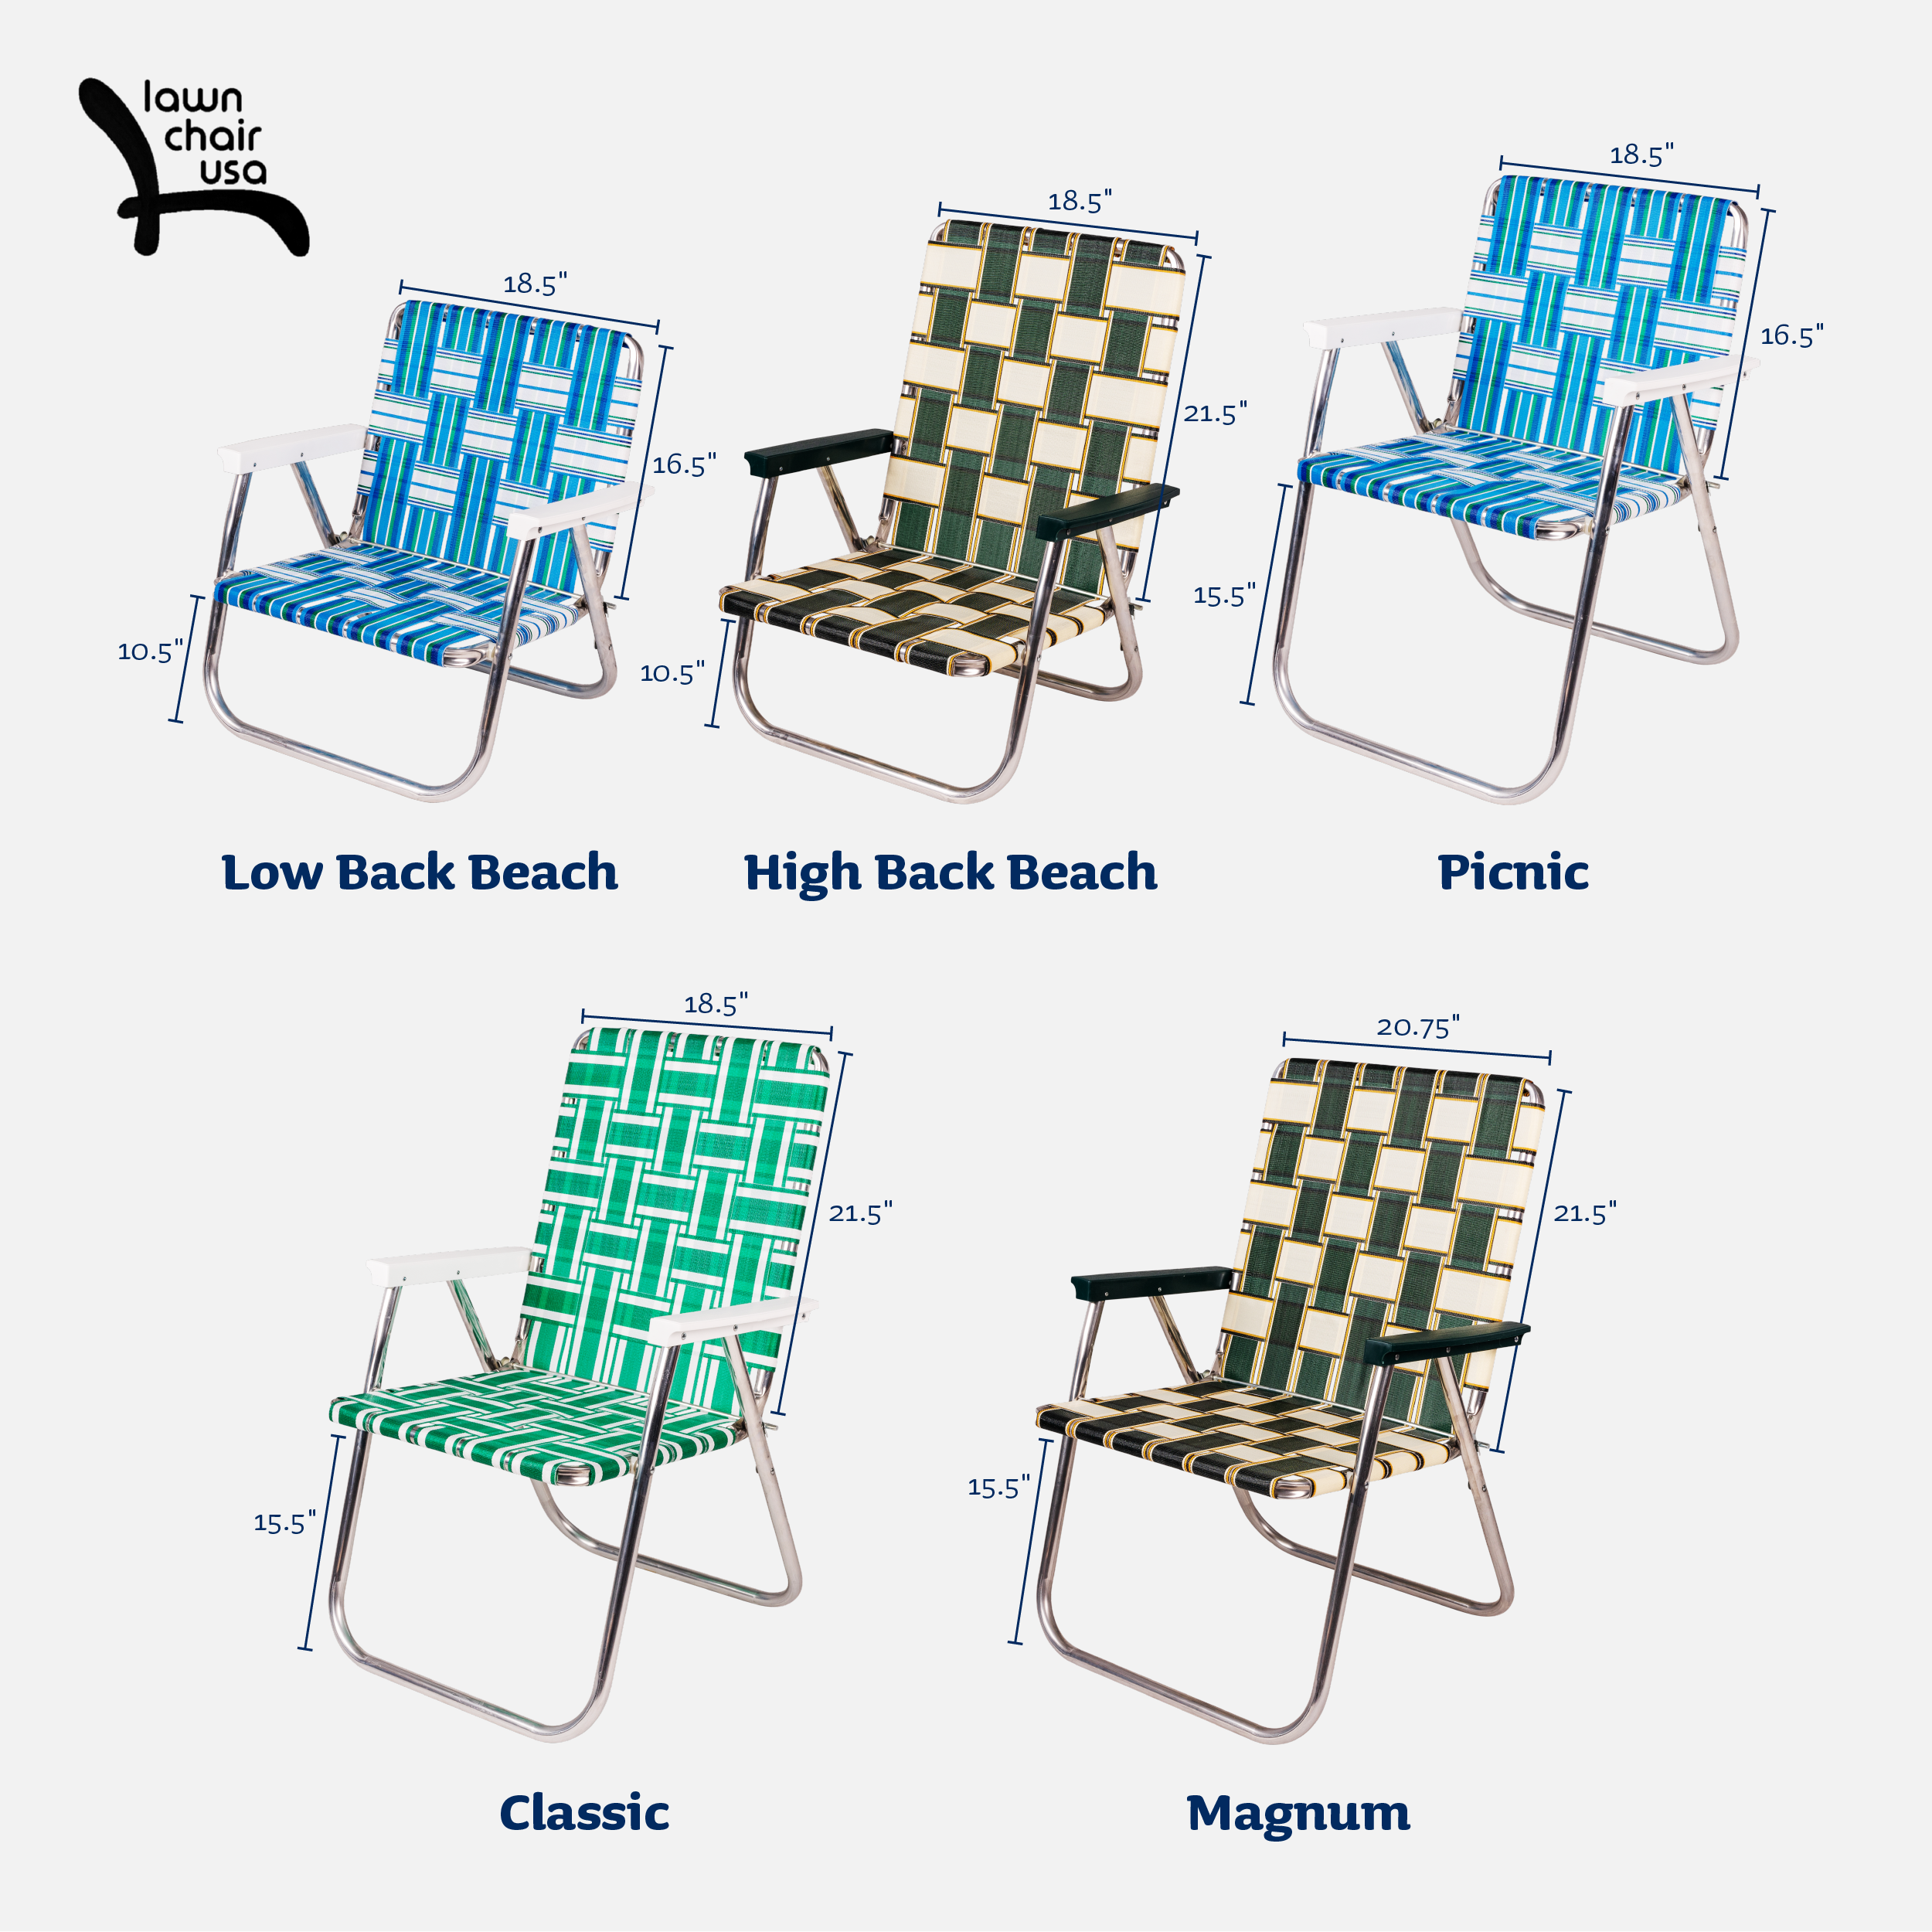 Lawn Chair USA Fabric Folding Chair (1 Pack), Black - image 2 of 6